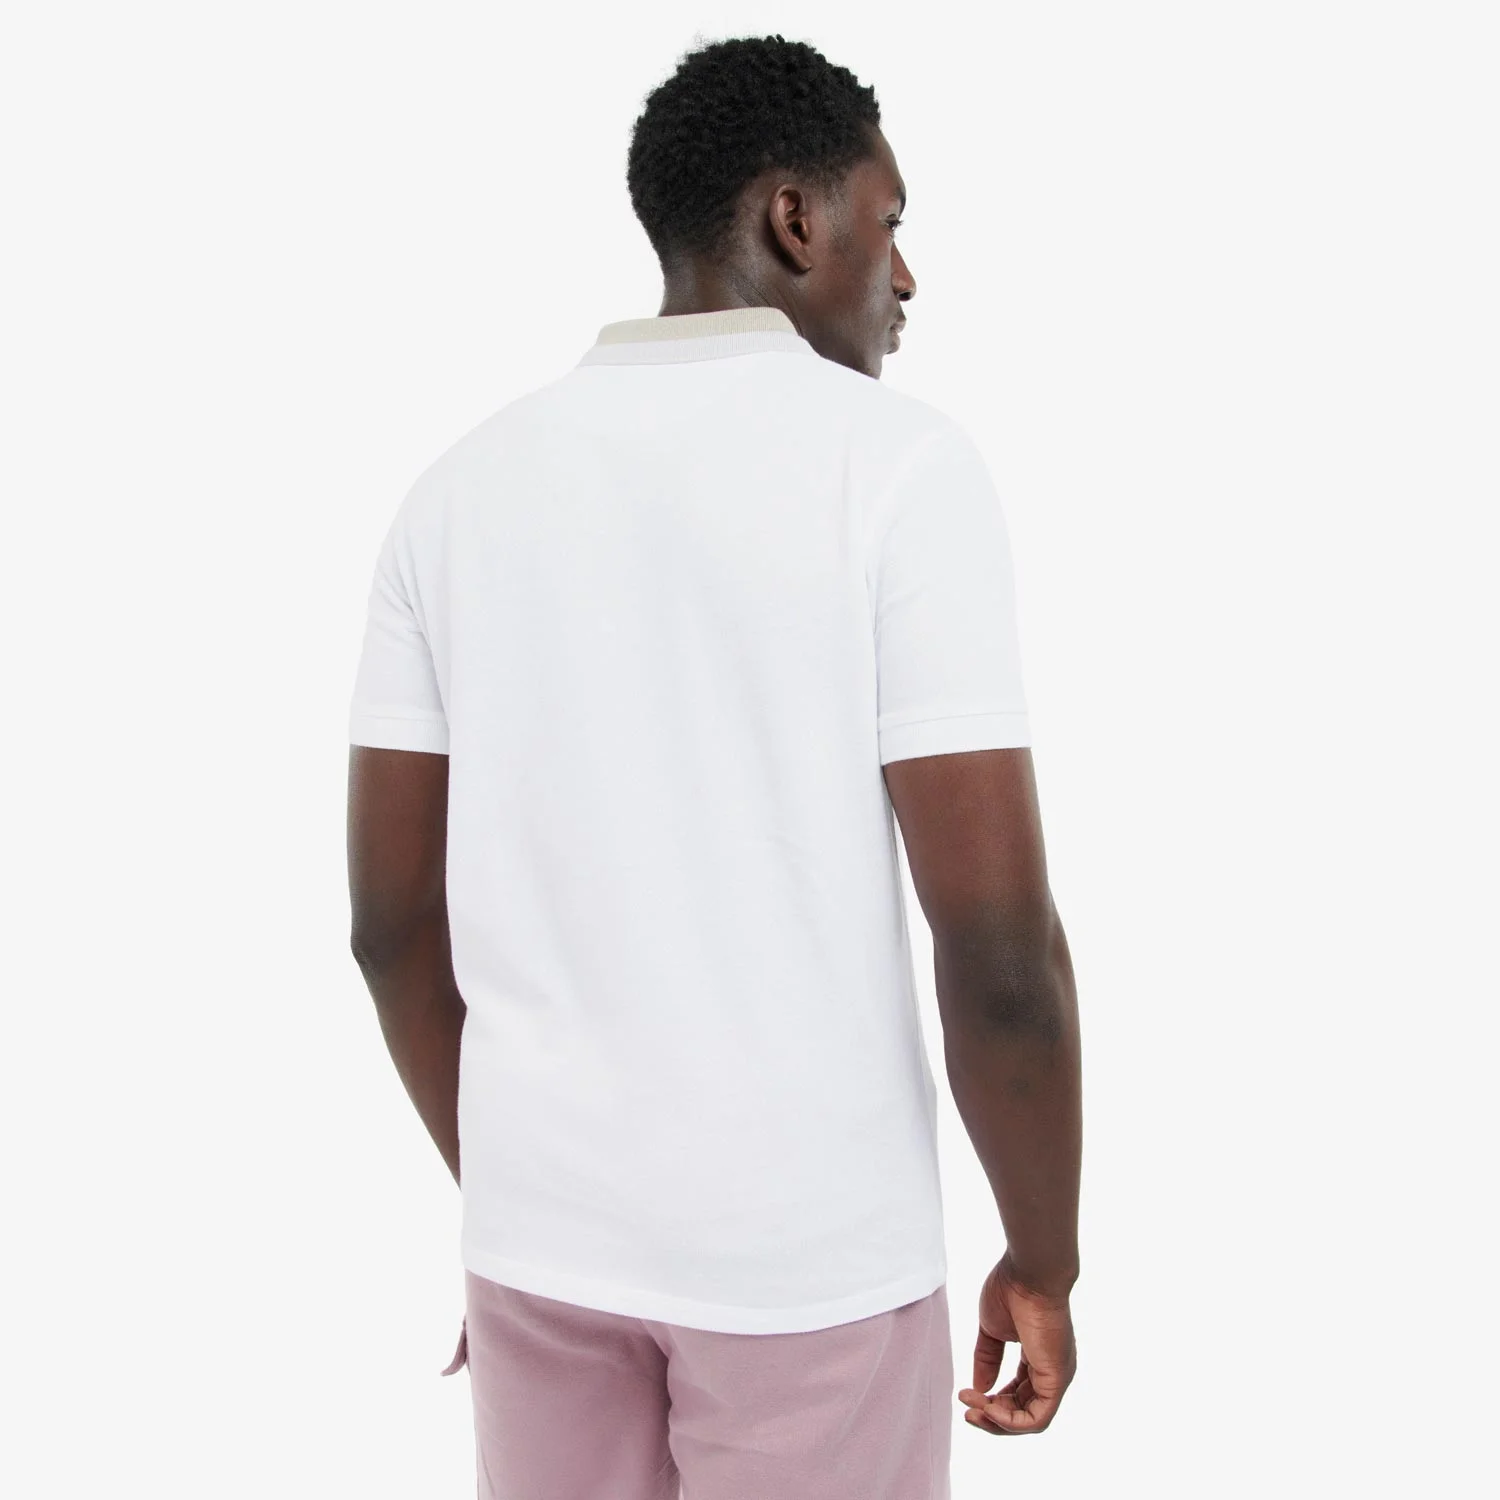 Barbour International Ampere Regular Fit Polo - White/Paloma/Thistle